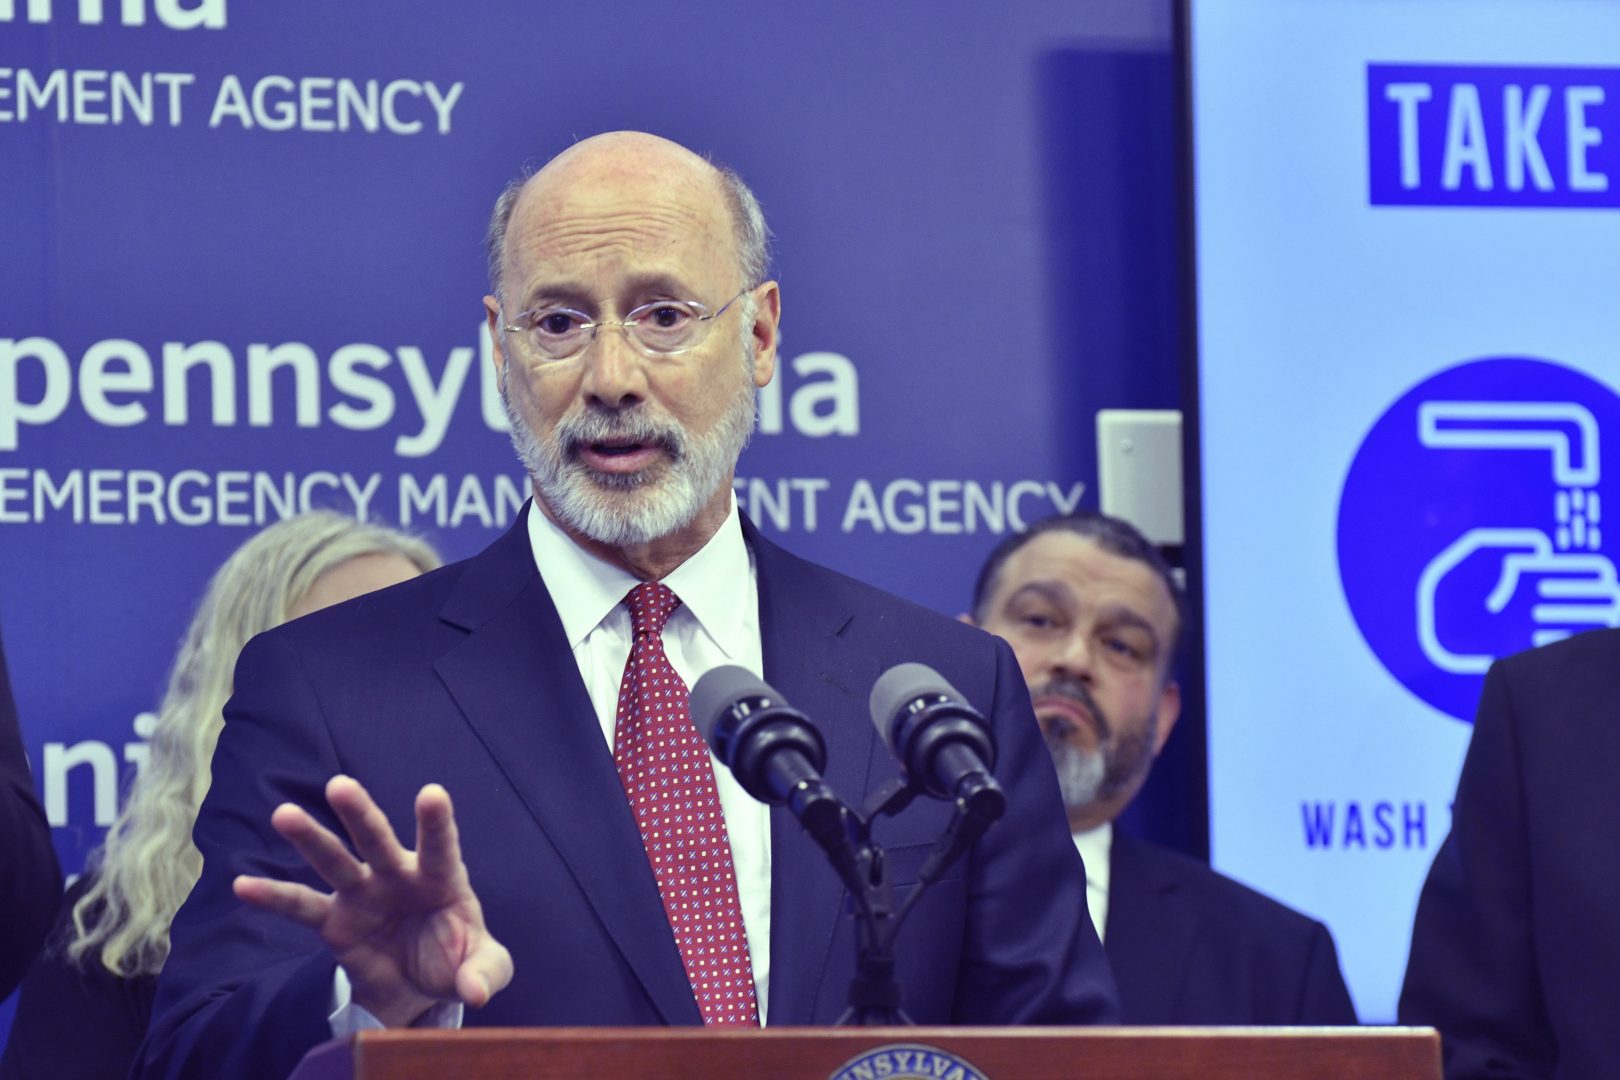 Gov. Tom Wolf of Pennsylvania speaks at a news conference at Pennsylvania Emergency Management Headquarters where he said he was ordering schools and other facilities to close in a suburban Philadelphia county, Montgomery County, that has been hard-hit by the COVID-19, Thursday, March 12, 2020 in Harrisburg.